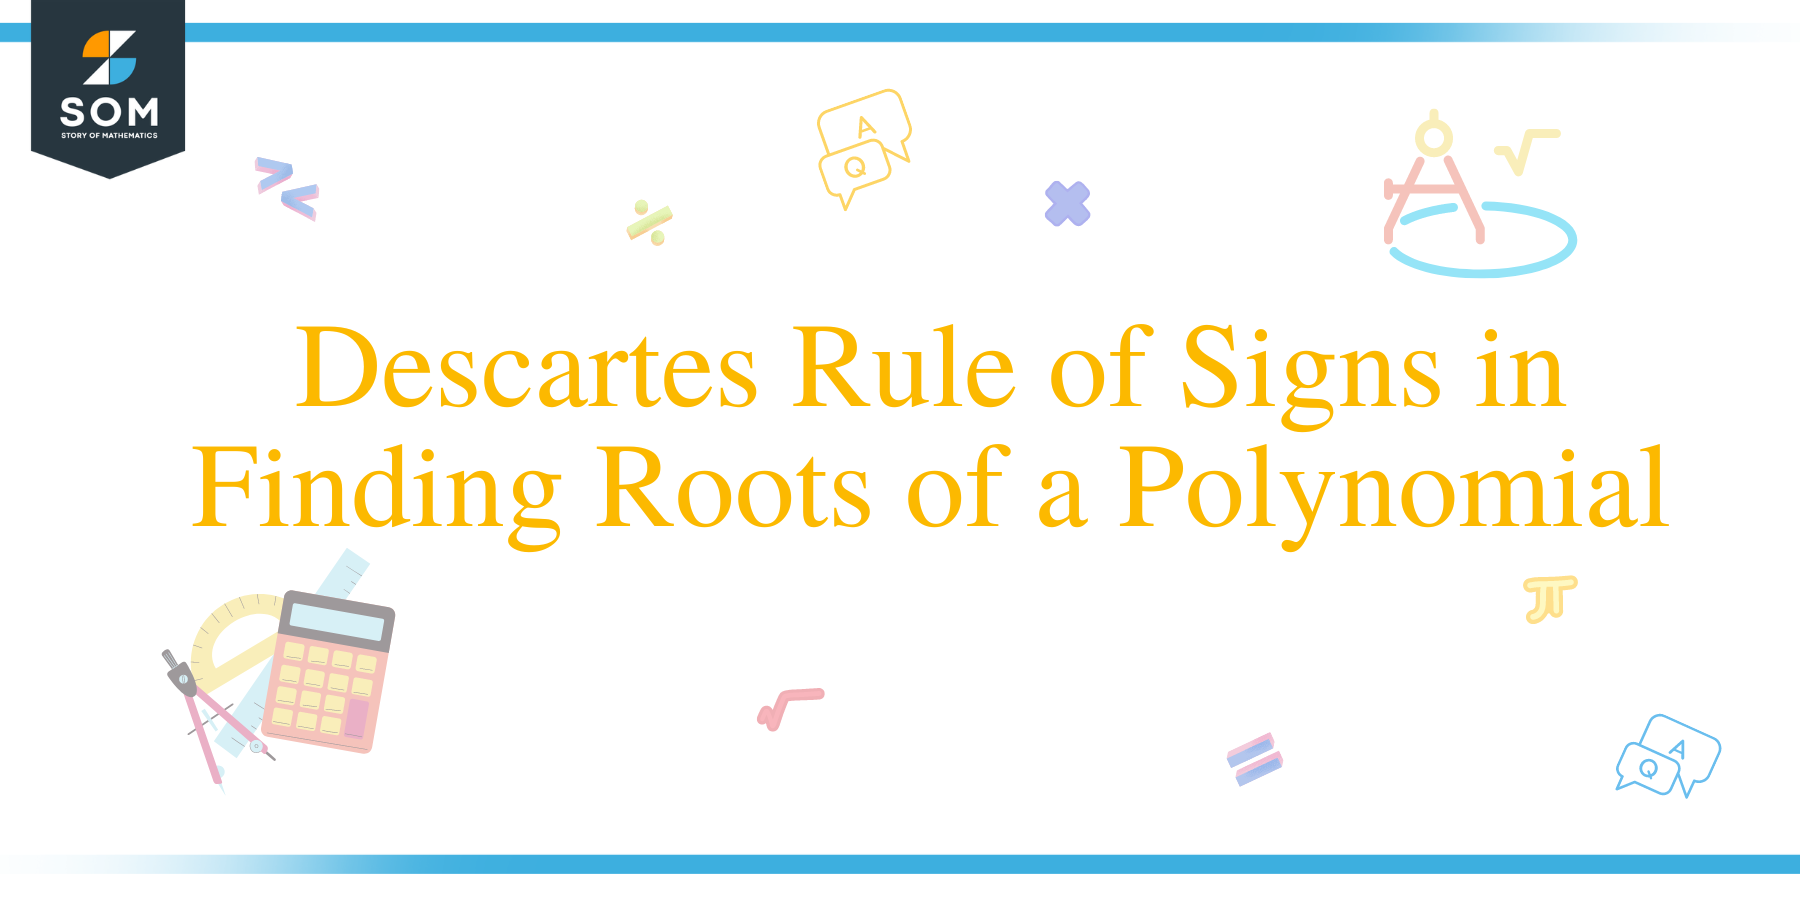 Descartes Rule of Signs in Finding Roots of a Polynomial